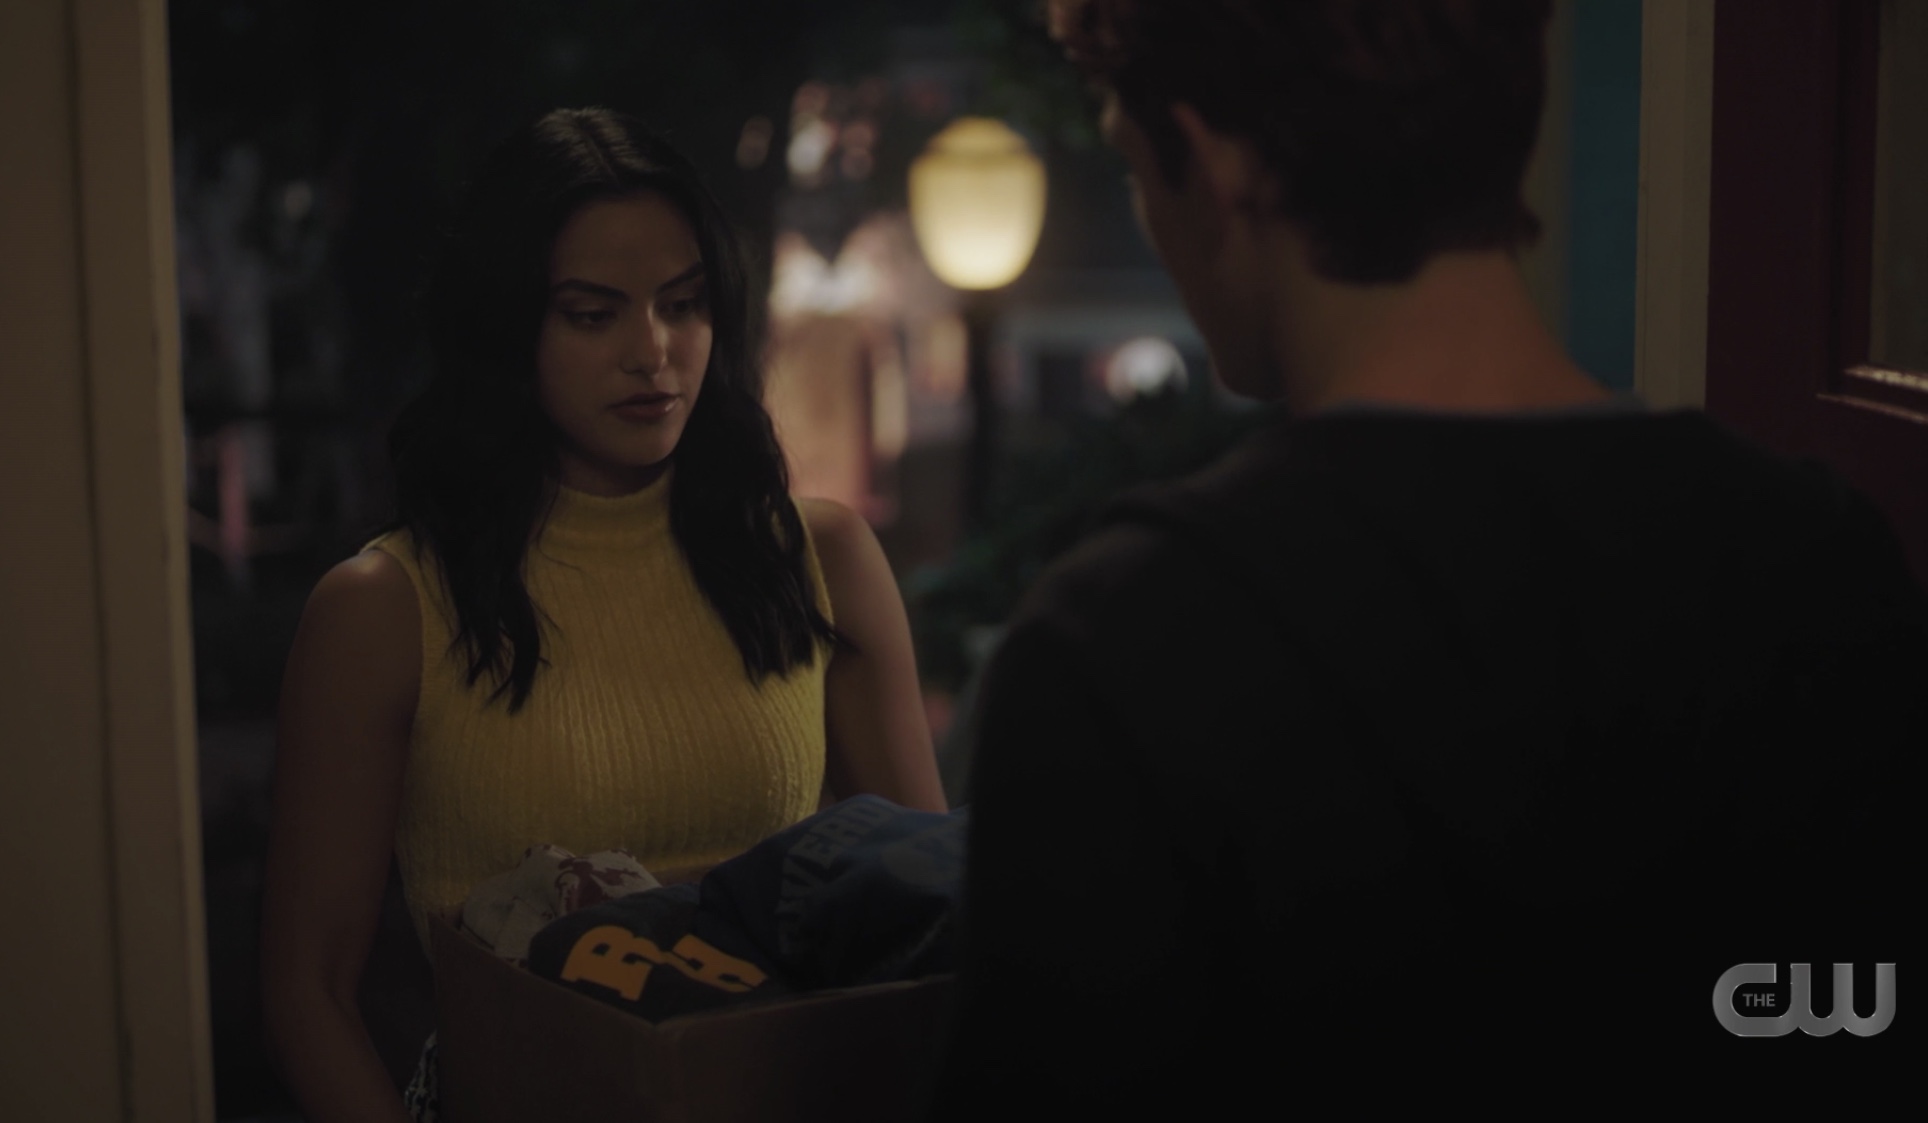 Veronica dropping off Archie's things and wanting to Netflix and chill.